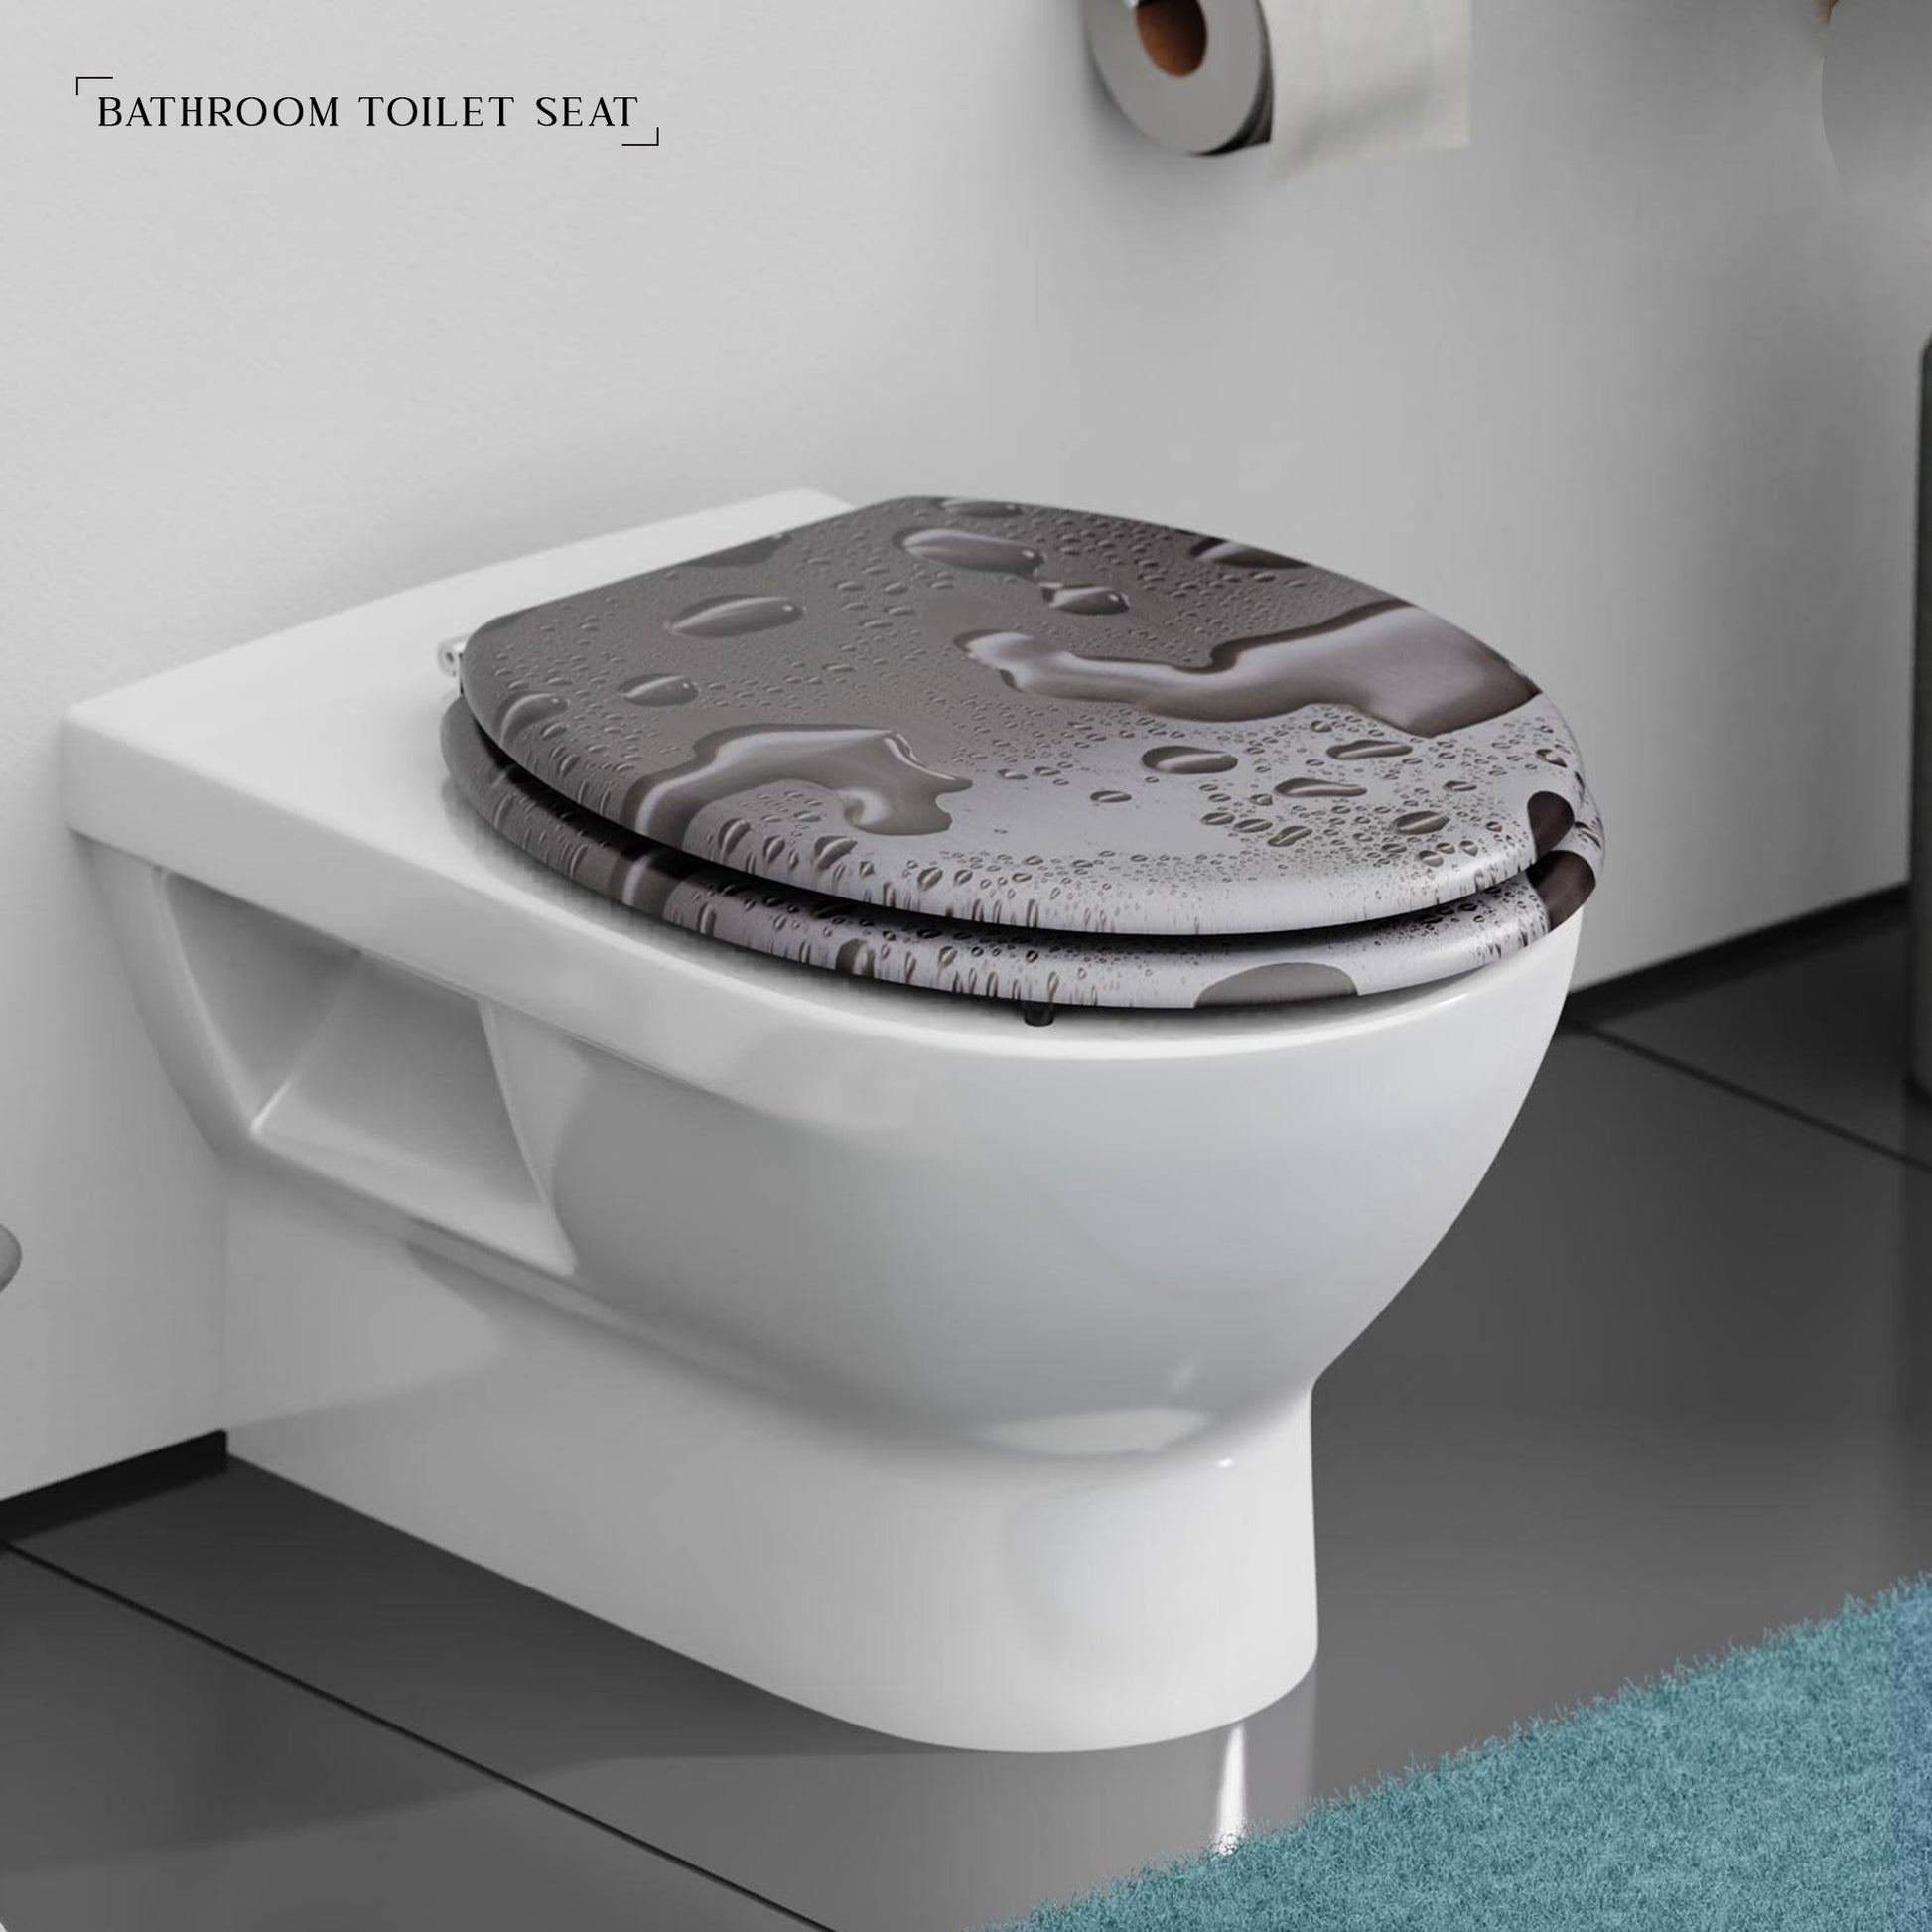 Hard Oval Shape Plastic Toilet Seat with Easy Clean For Bathrooms - Application Image 2